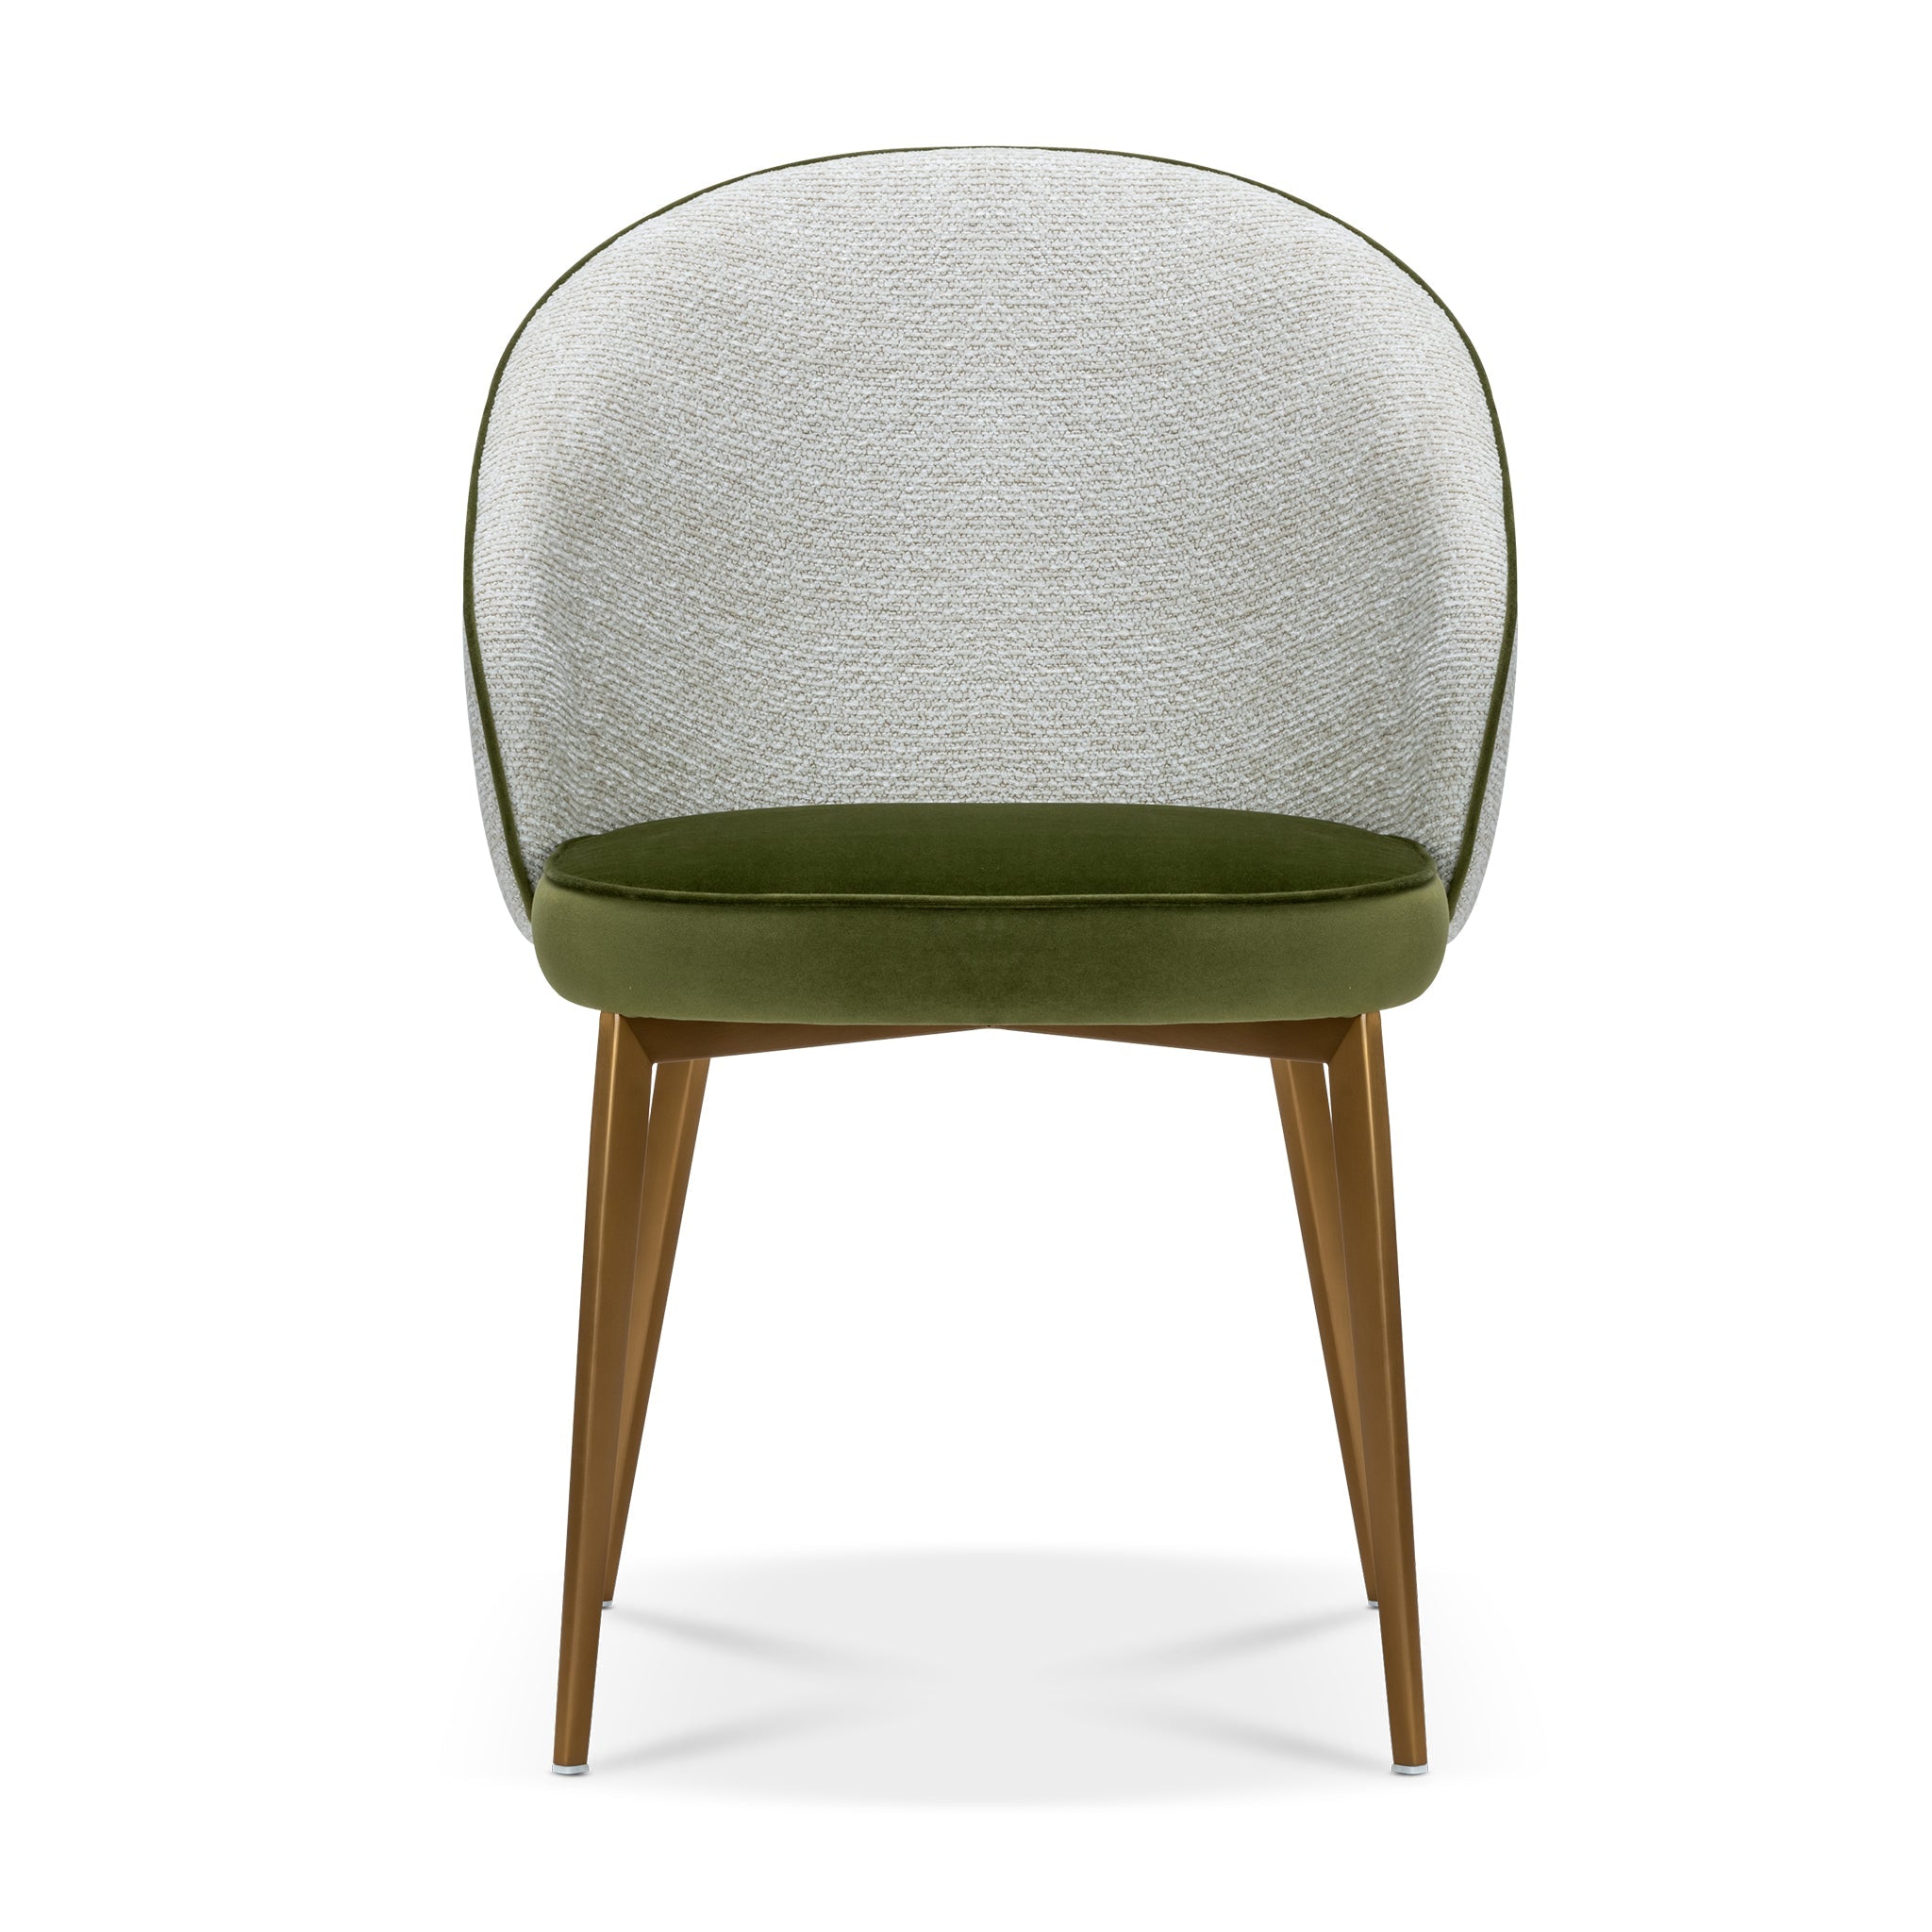 POLO VERDE DINING CHAIR